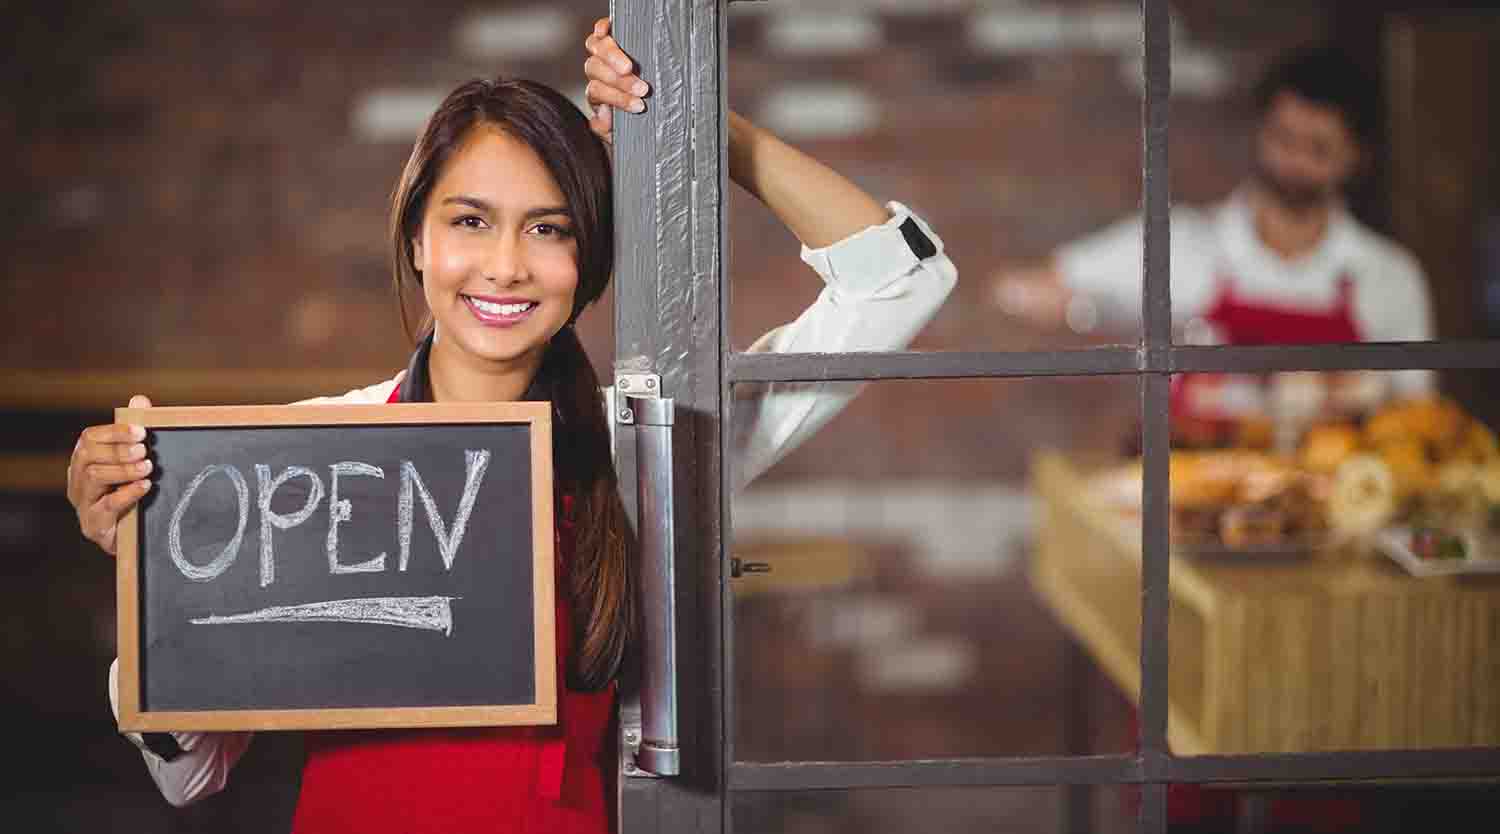 Business woman holding an open sign.